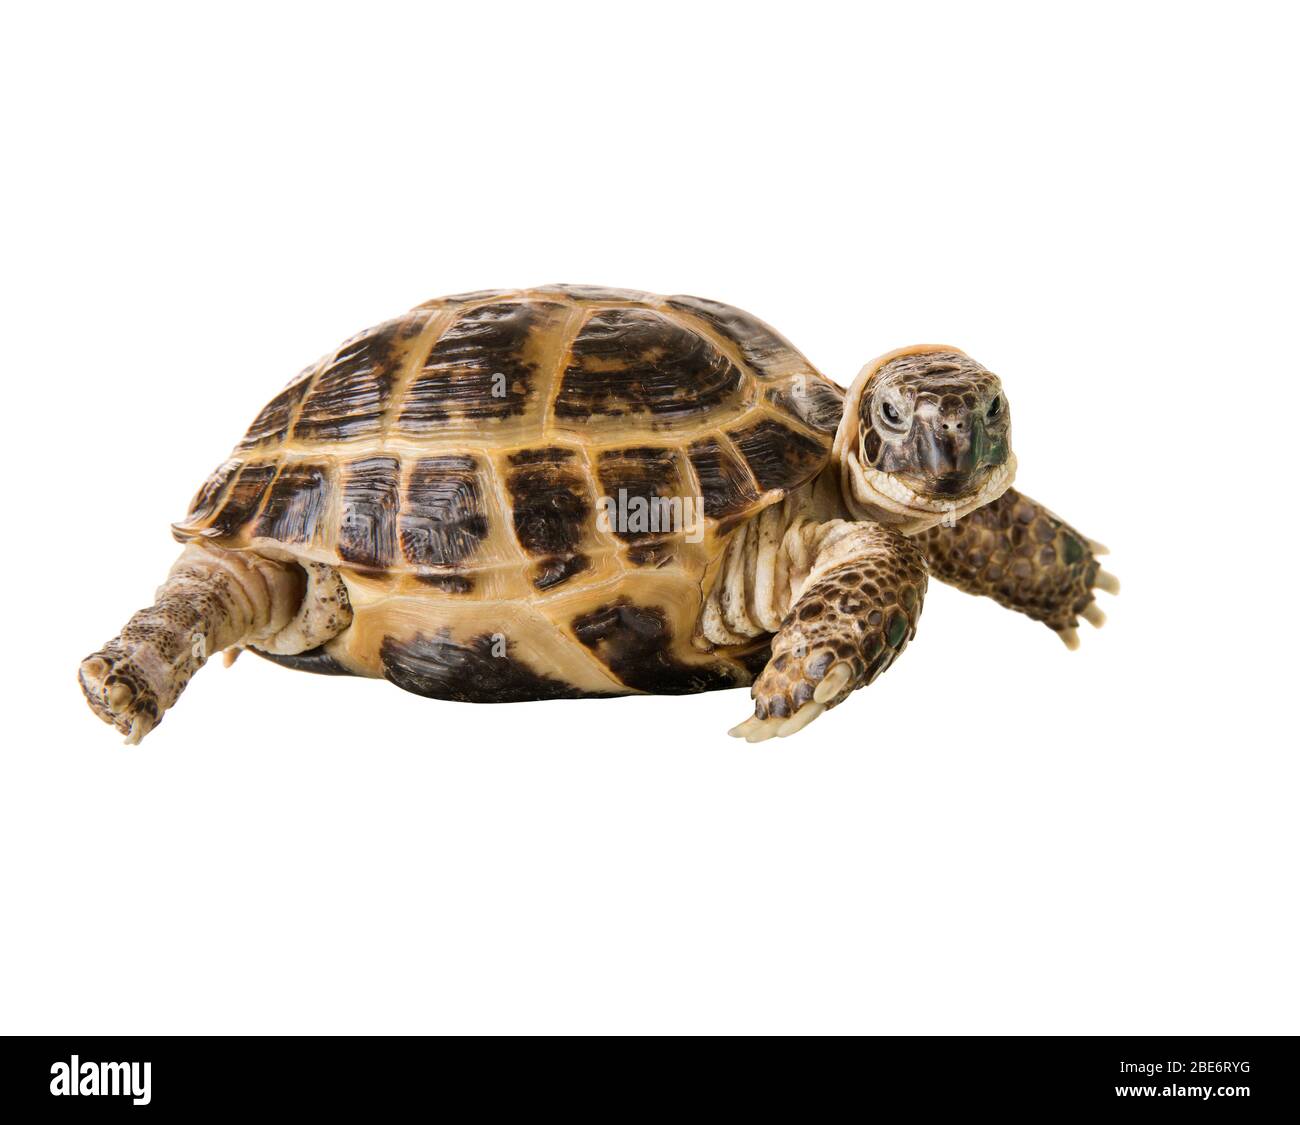 one typical tortoise on white background; isolated, close up Stock Photo